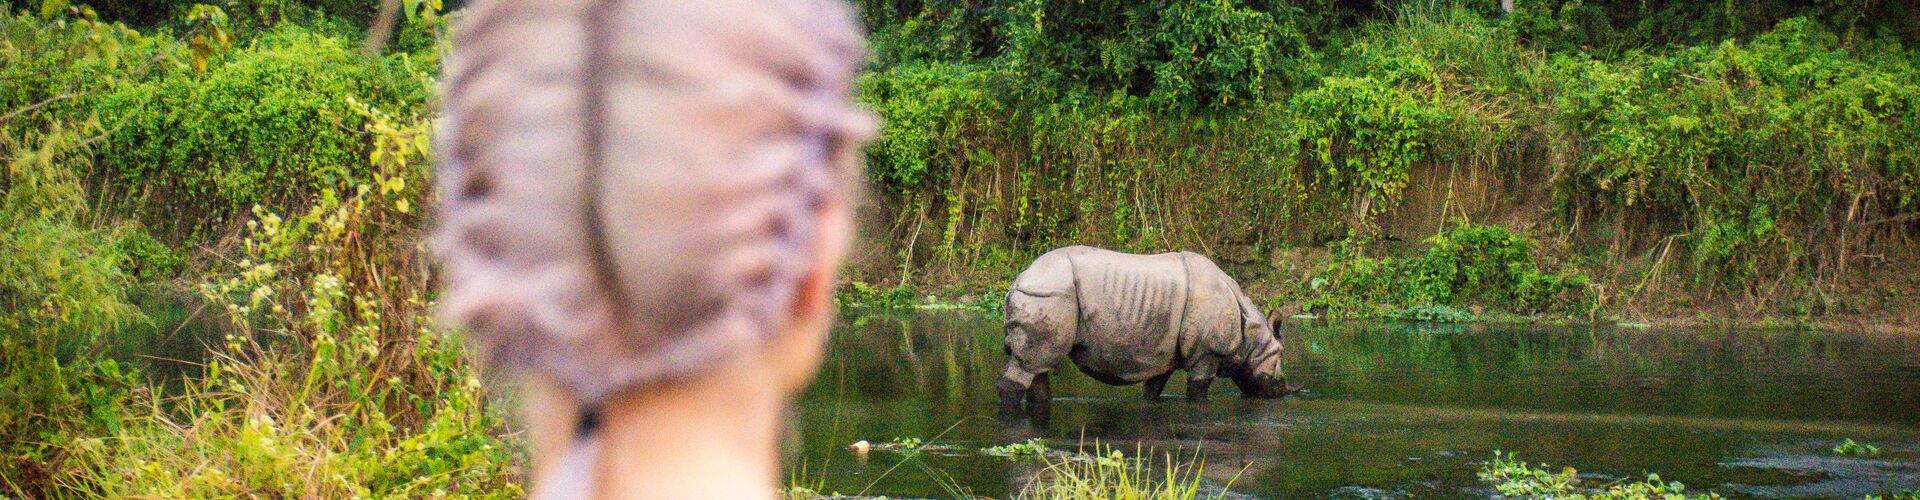 A traveller watching a rhino drinking water in Chitwam National Park